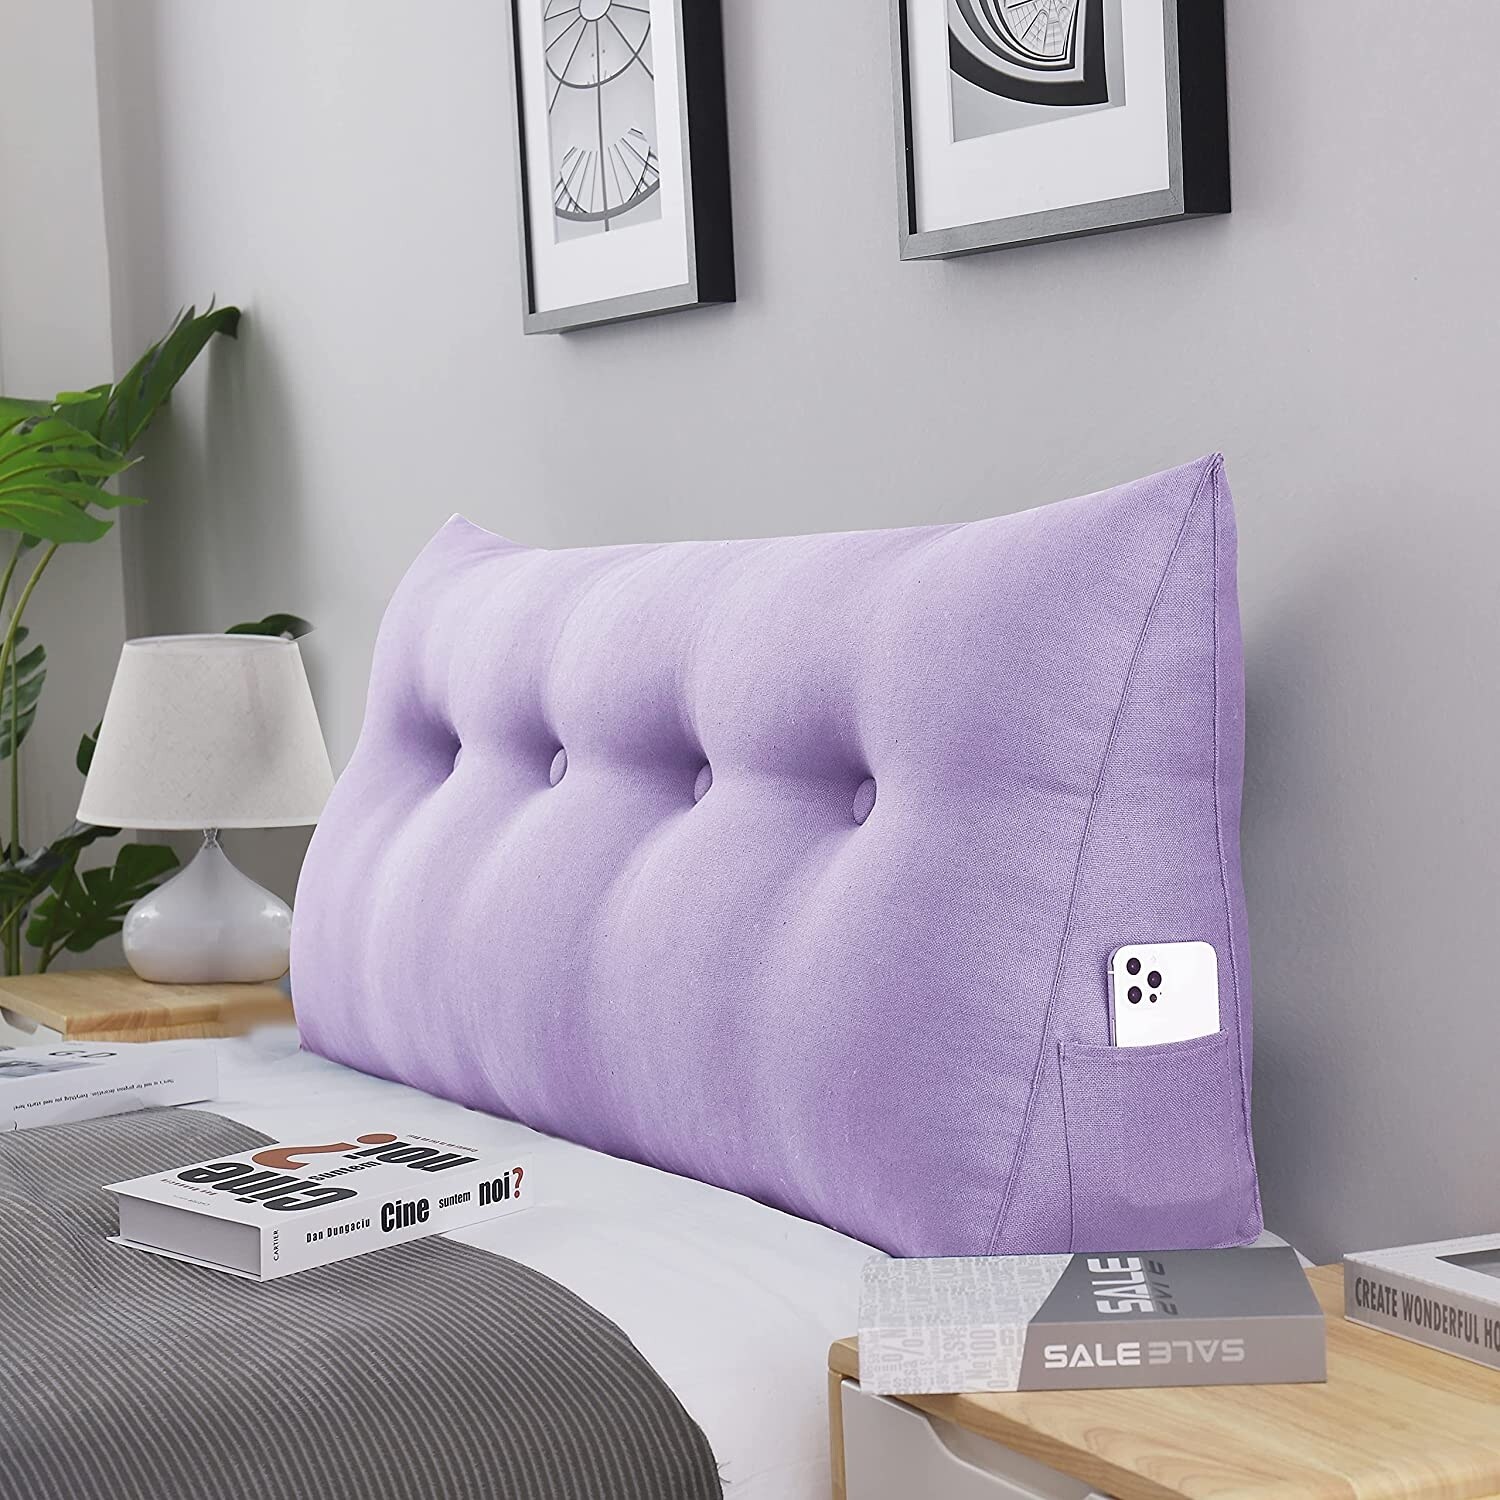 https://ak1.ostkcdn.com/images/products/is/images/direct/db02758179674fd9013d8b8e153352f0f3f6cb67/WOWMAX-Bed-Rest-Wedge-Pillow-Headboard-Reading-TV-Back-Support-Cushion.jpg